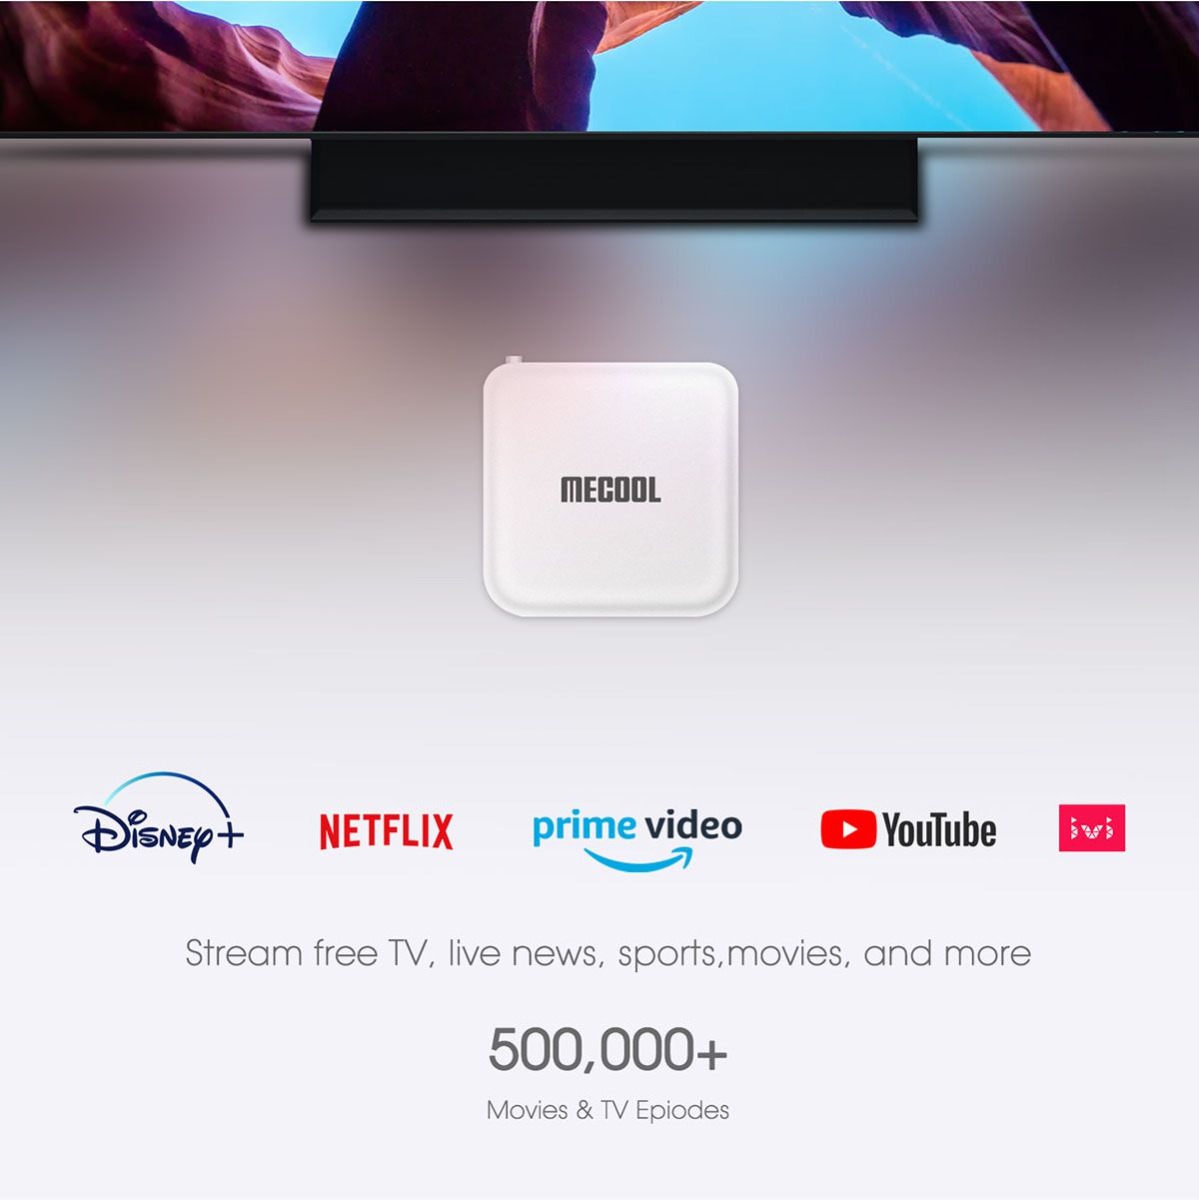 NETFLIX prime video YouTube Stream free TV, live news, sports,movies, and more 500,000+ Movies & TV Epiodes